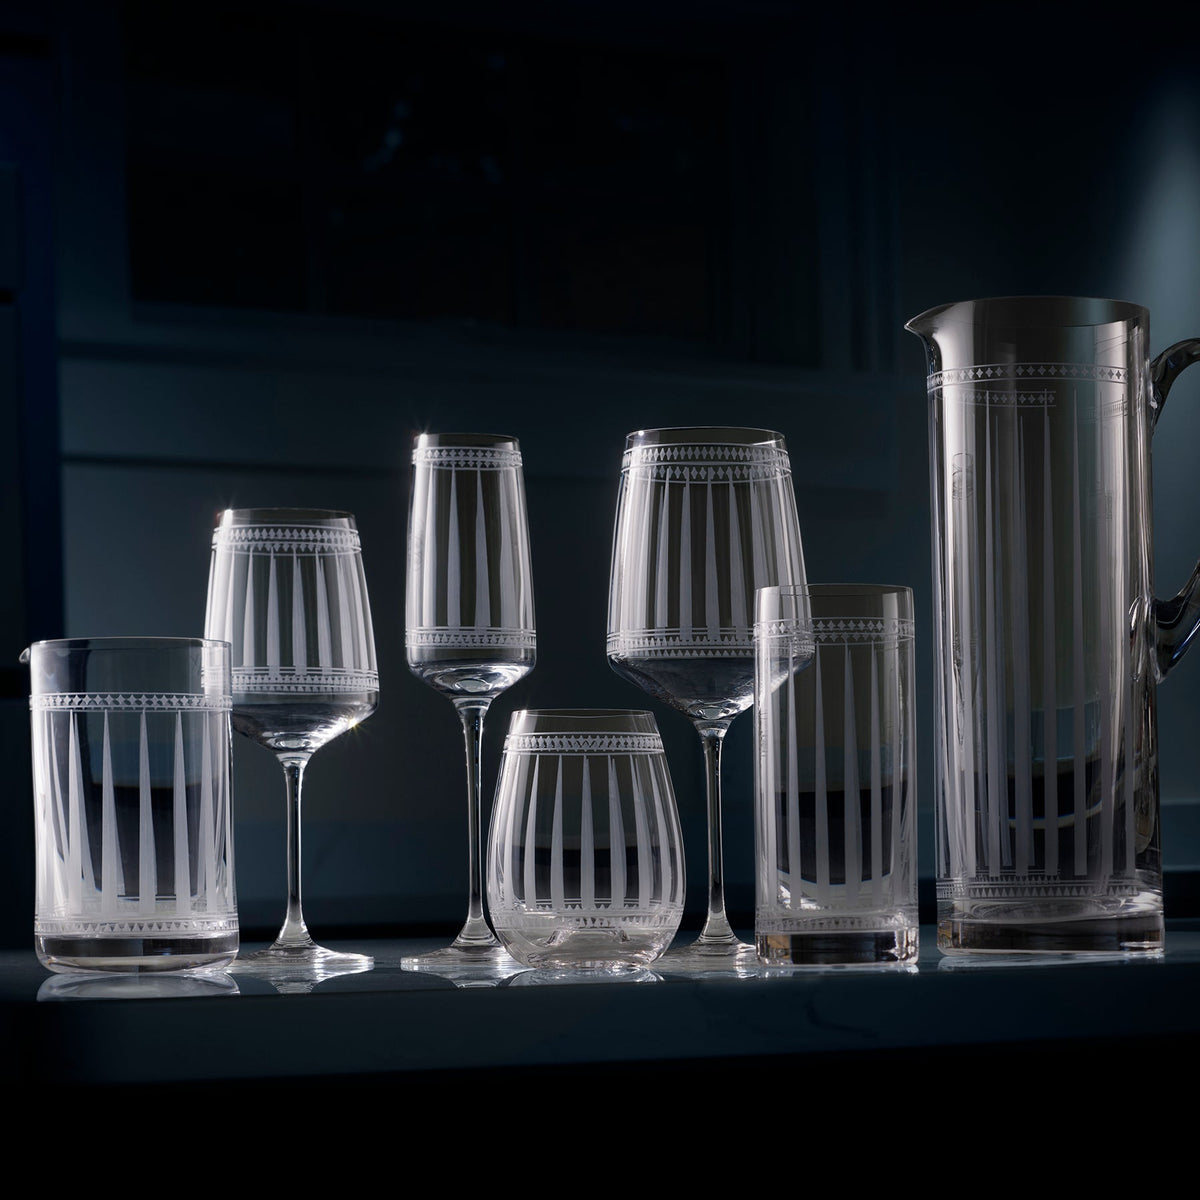 A collection of Marrakech Mixing Glasses, including a pitcher, arranged on a table with graphic patterns inspired by Marrakech.